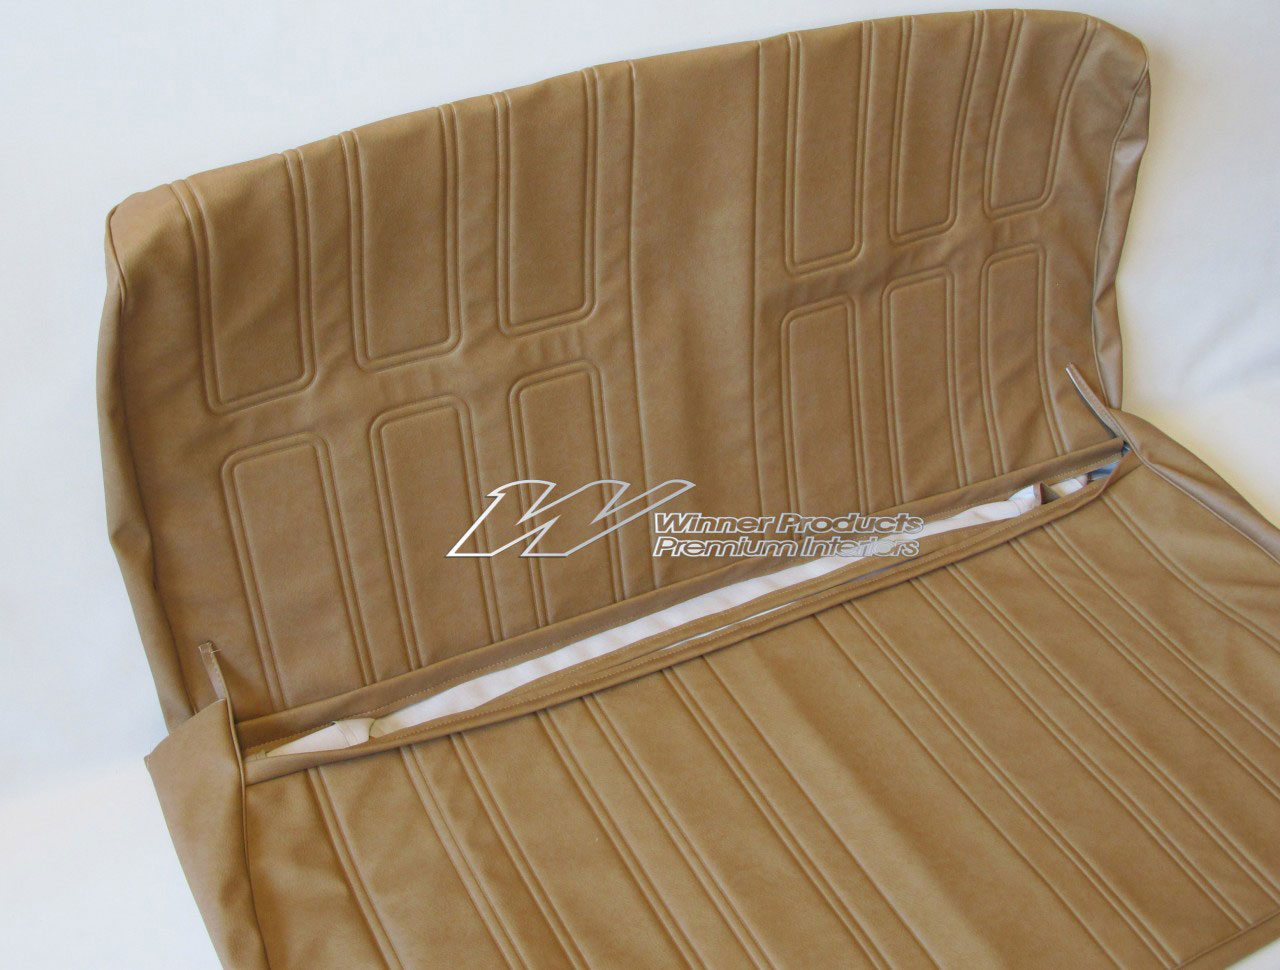 Holden Belmont HQ Belmont Sedan 11A Saddle Seat Covers (Image 1 of 5)